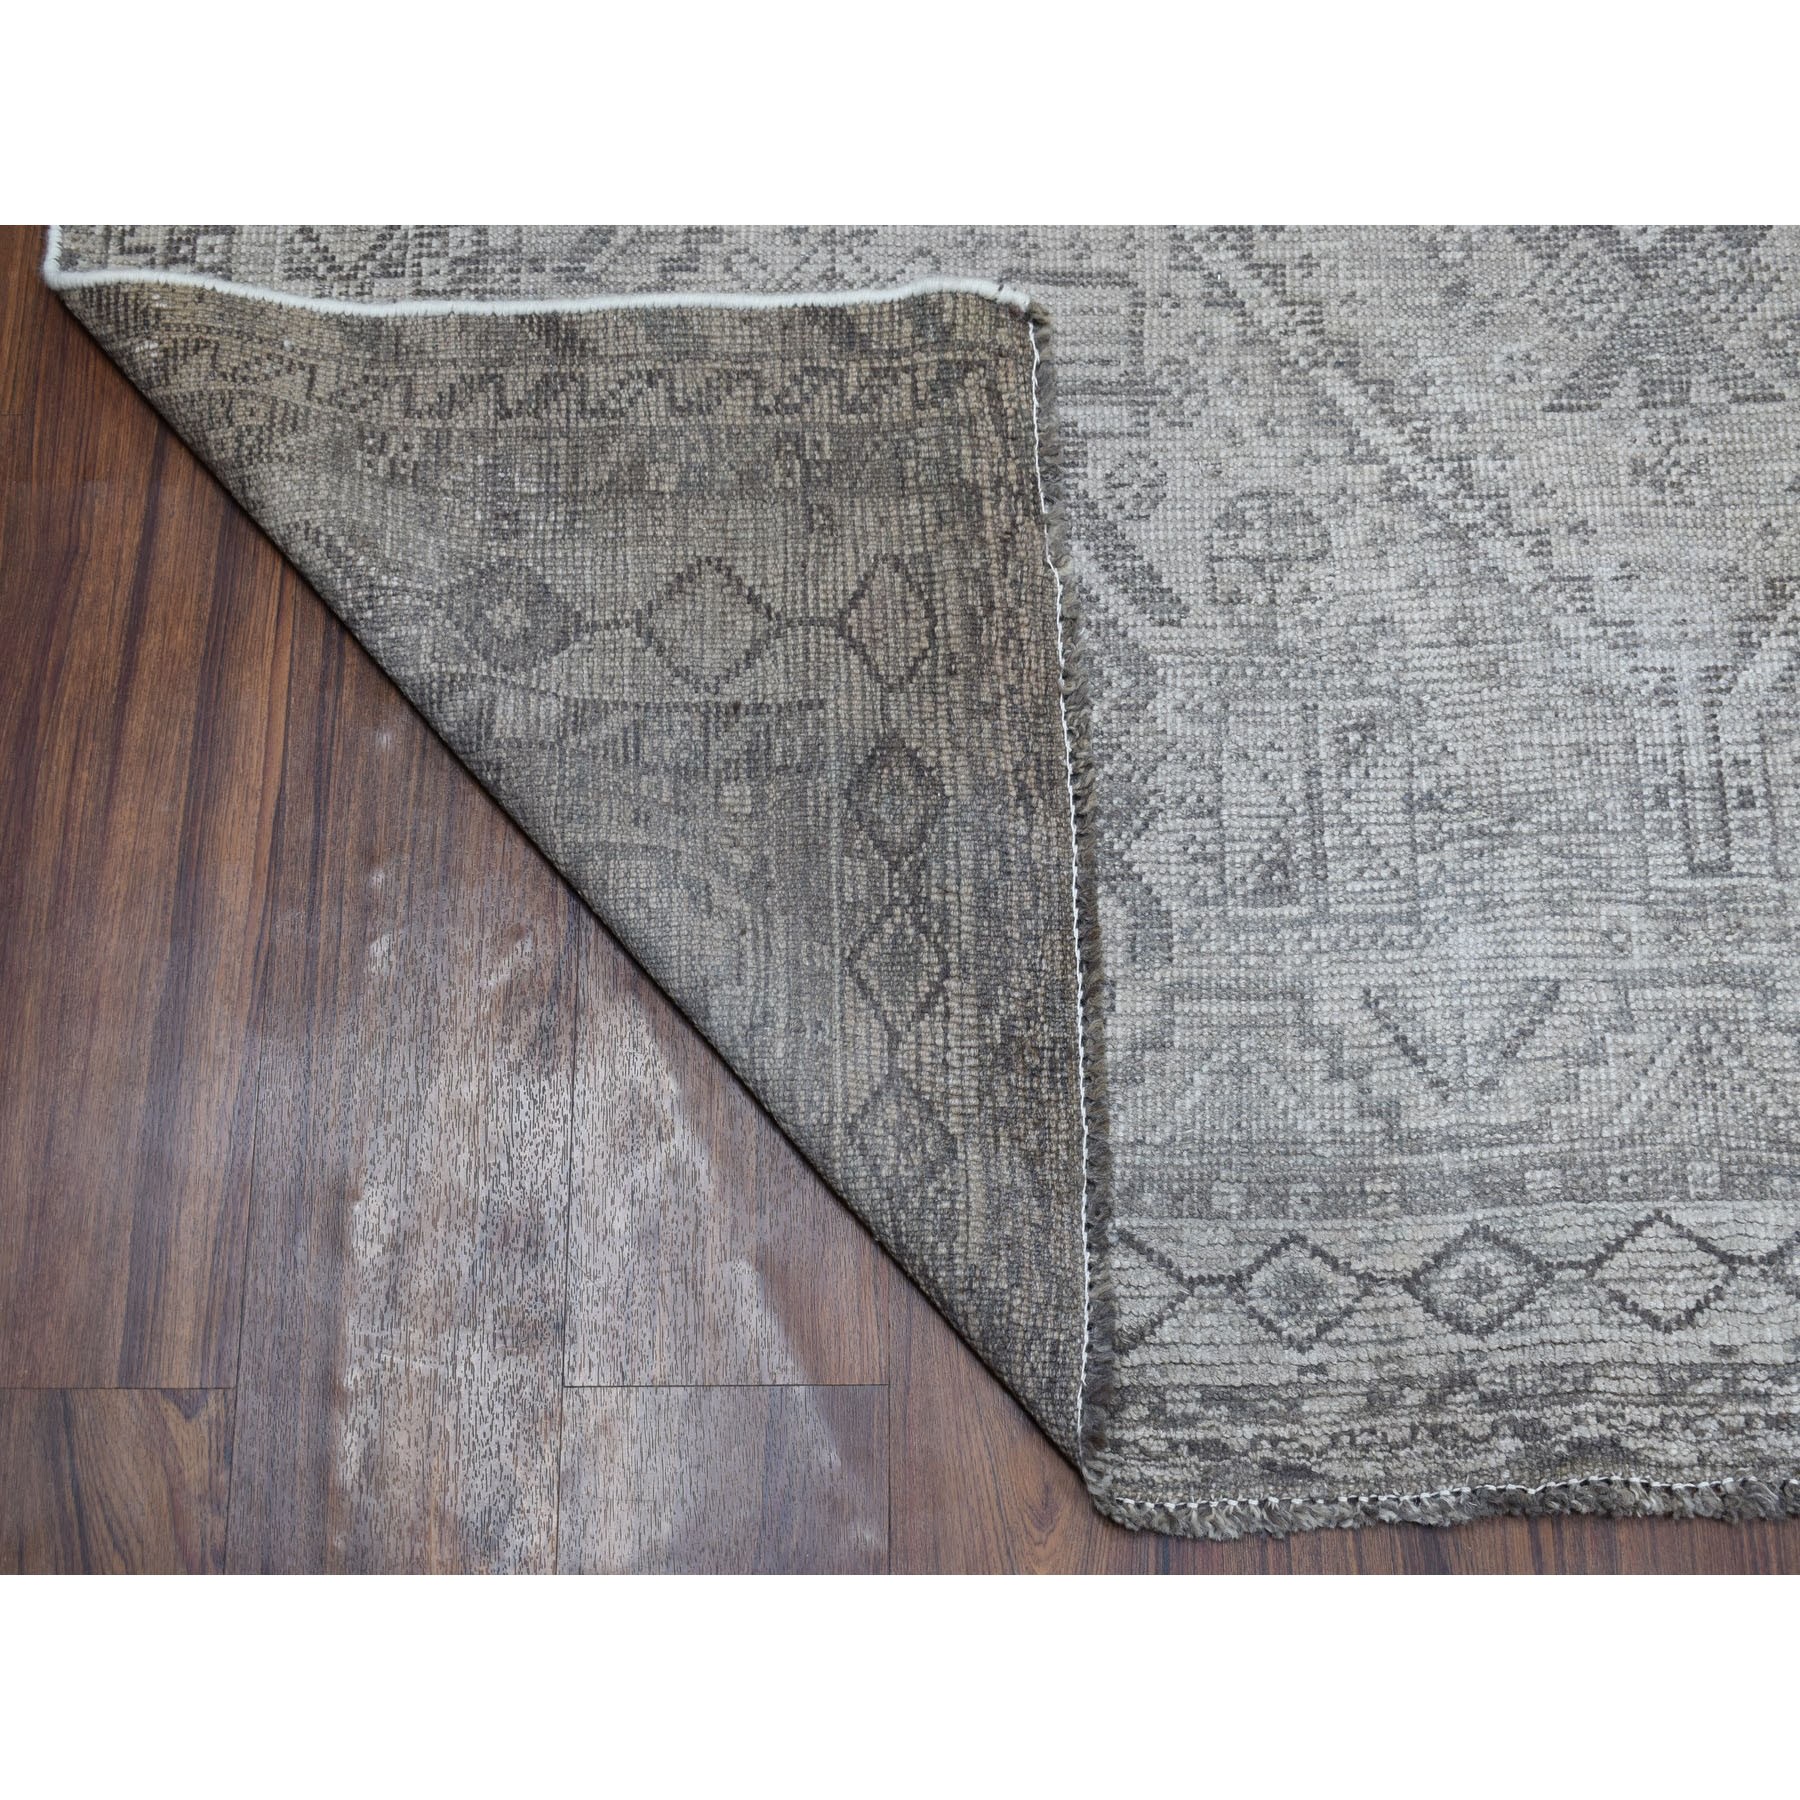 5-6 x8-2  Vintage And Worn Down Distressed Colors Persian Qashqai Hand Knotted Bohemian Rug 